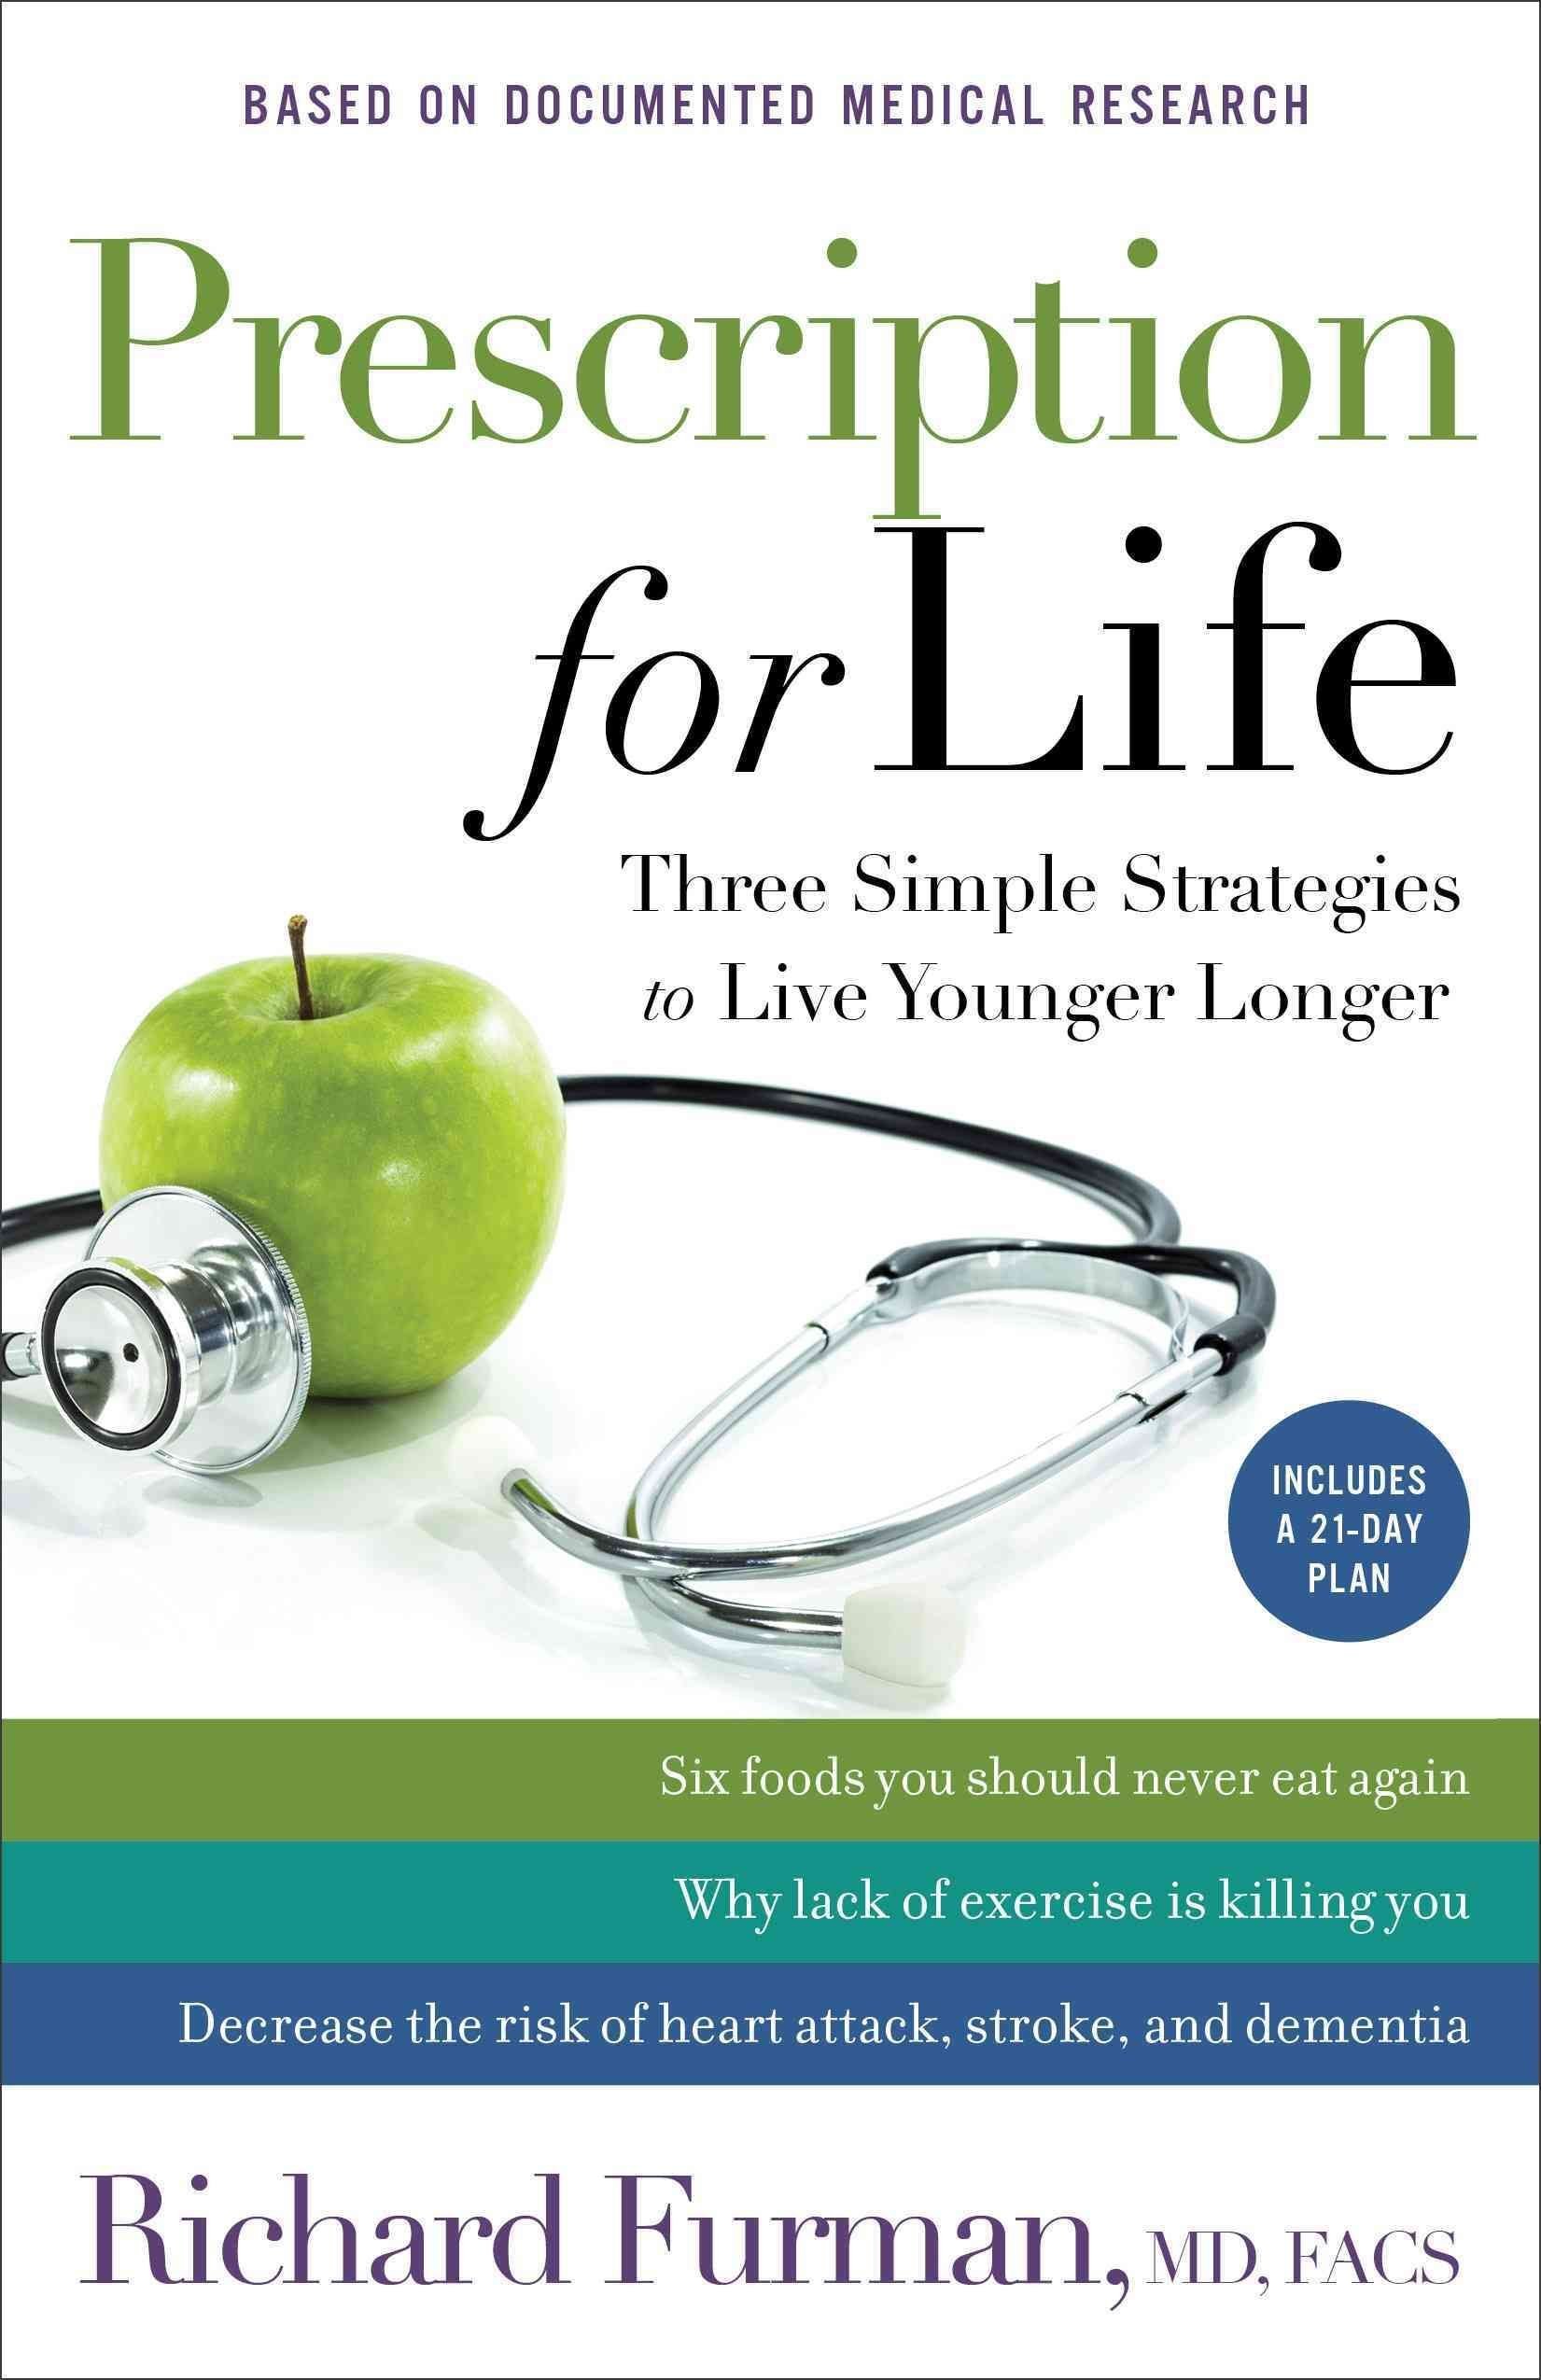 Prescription for Life - Three Simple Strategies to Live Younger Longer